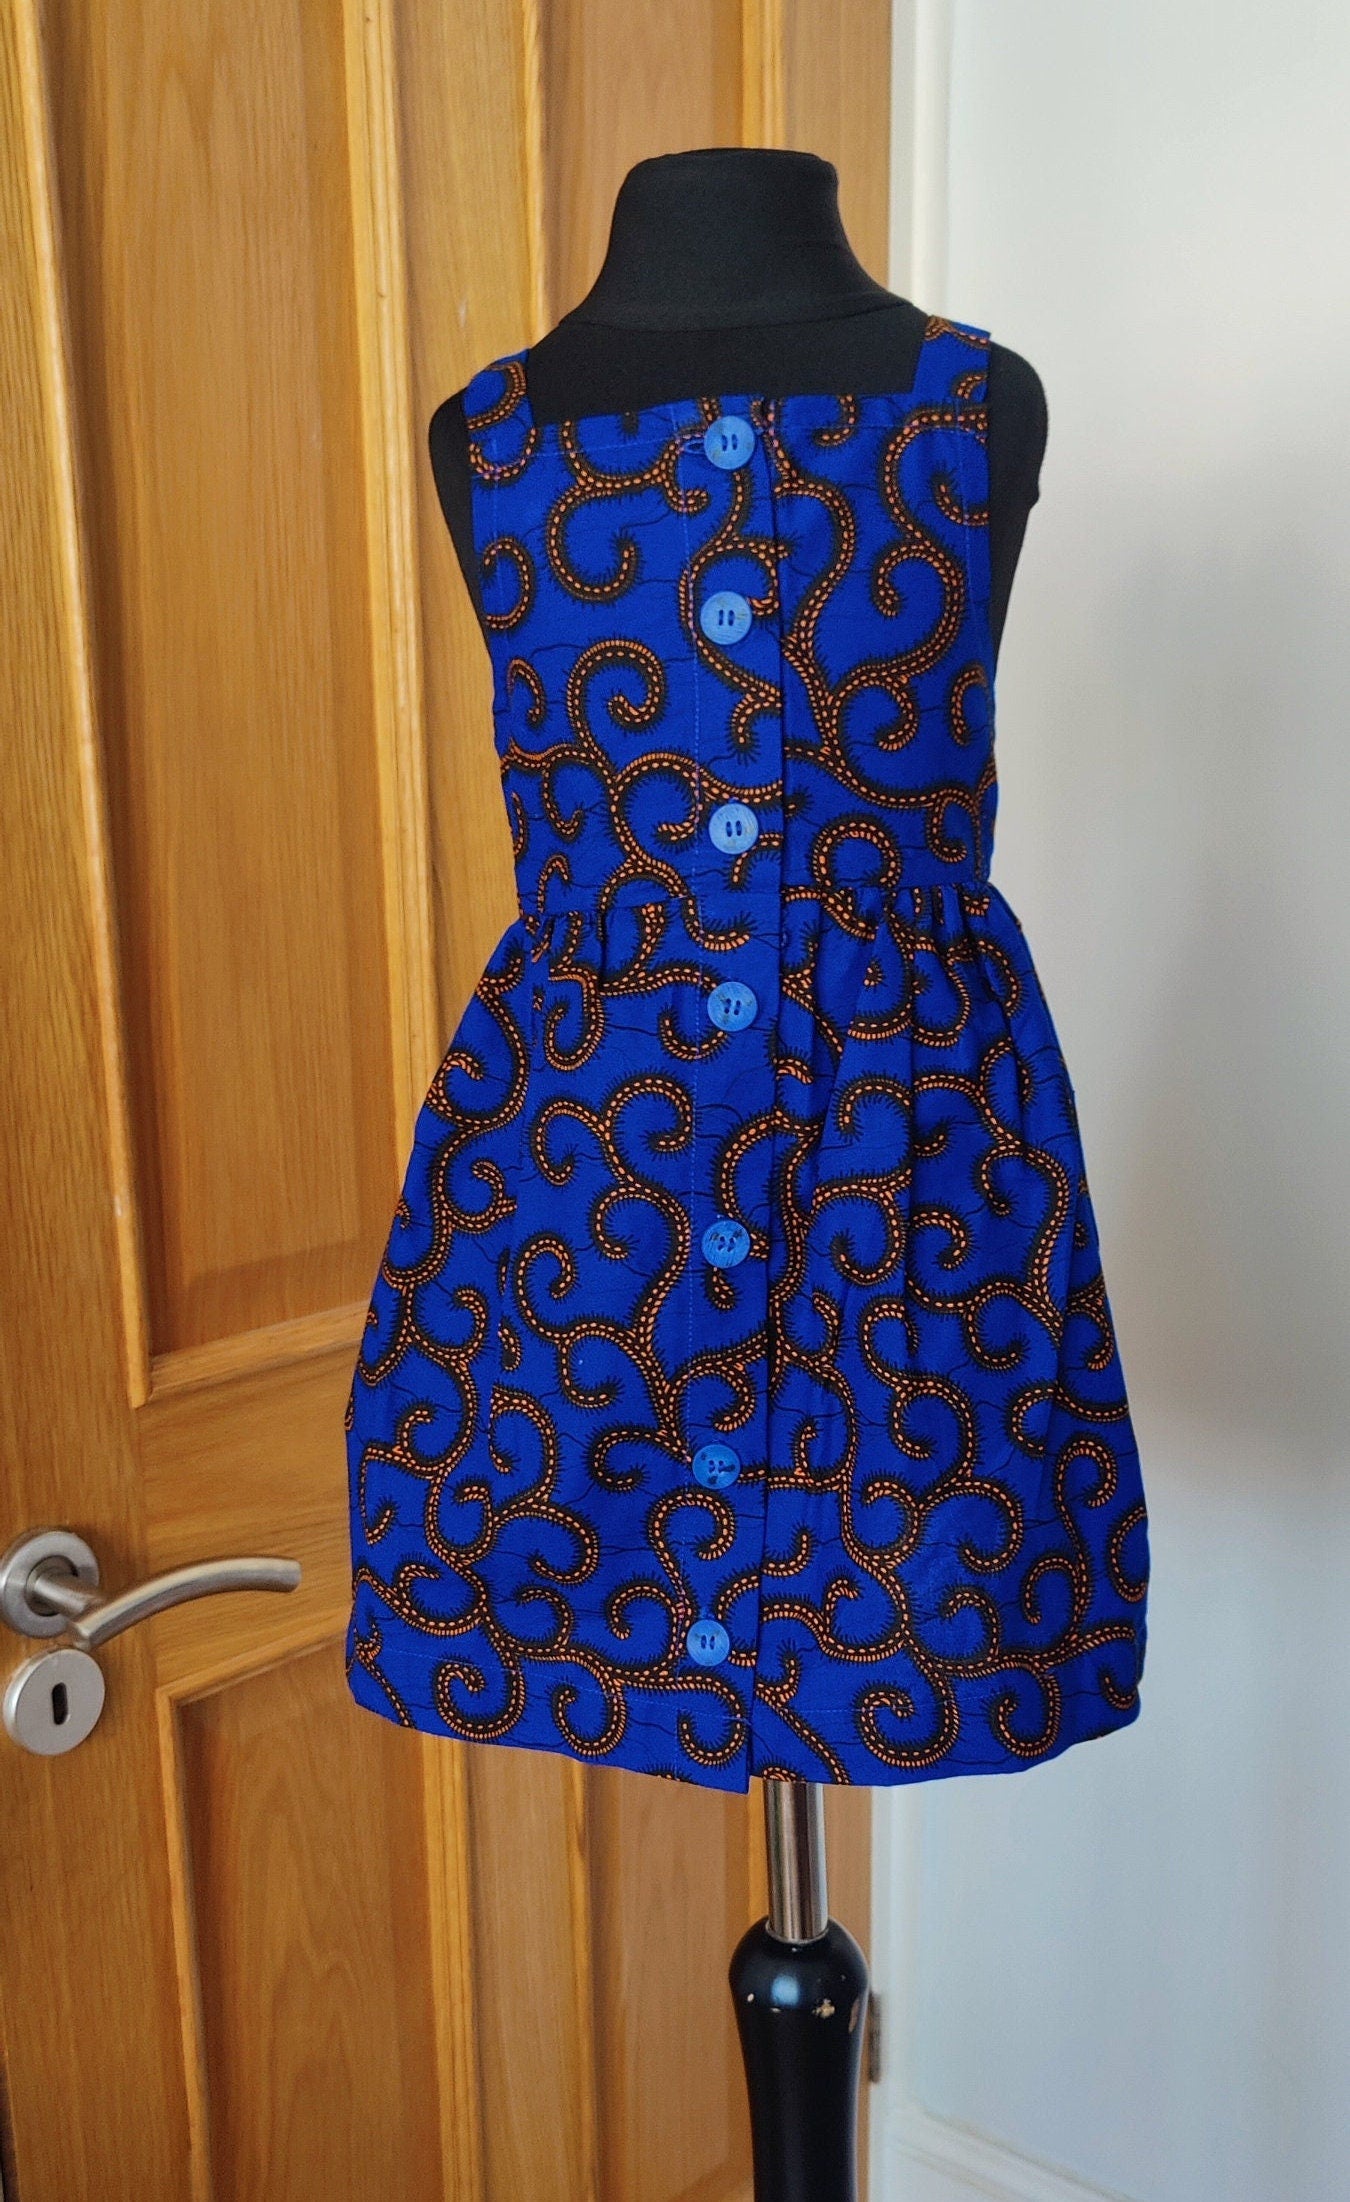 Copy of 3 and 4 year old Toddler Dress Pinafore African Print Dress/ Blue